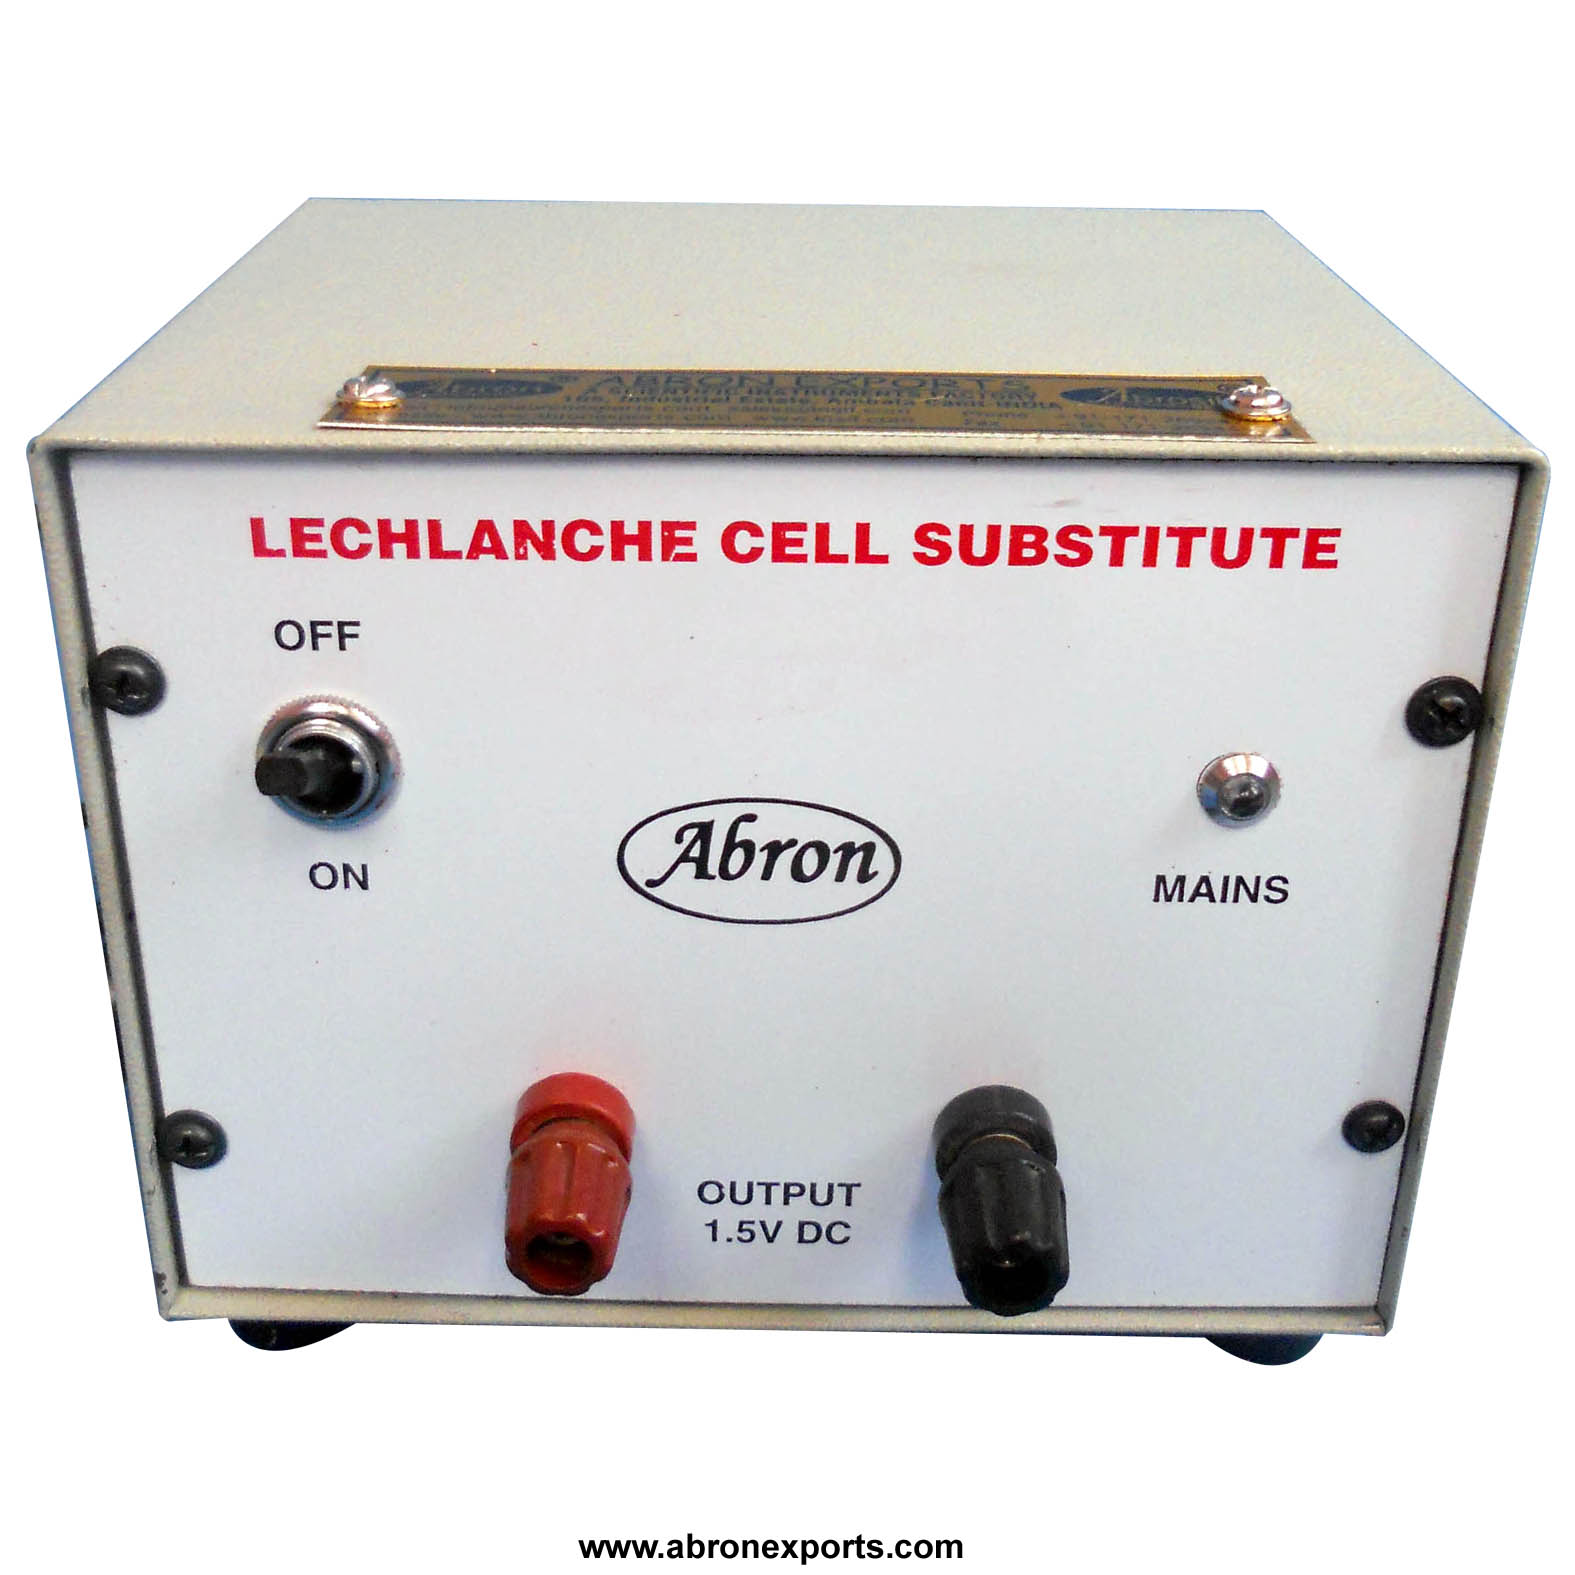 Cell leclanche electronic abron AE-1255a2